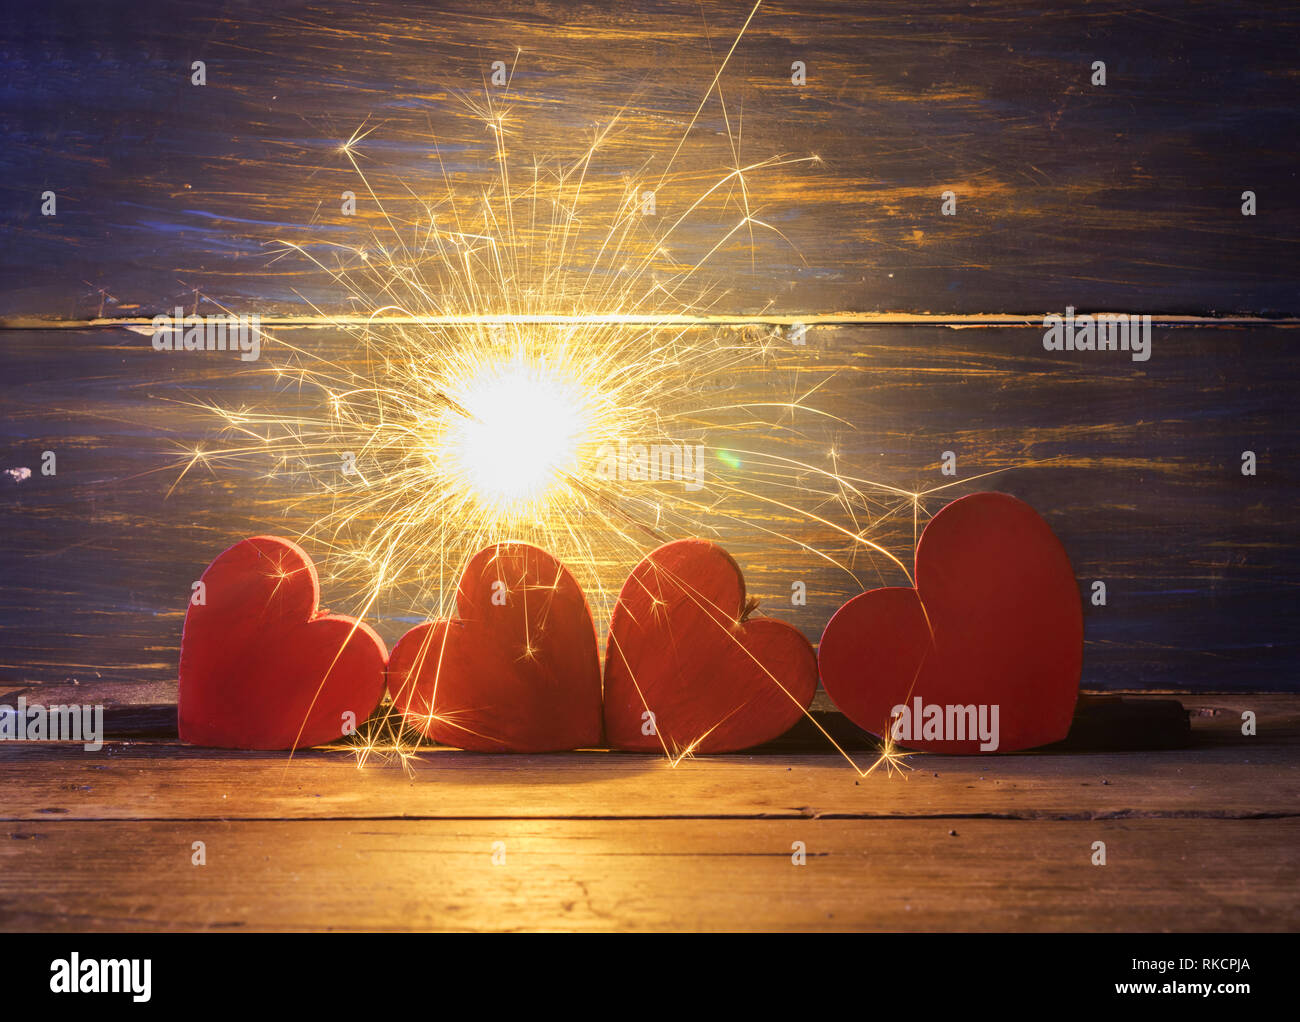 Bengal lit with four red hearts on a wooden board. Long exposition Stock Photo